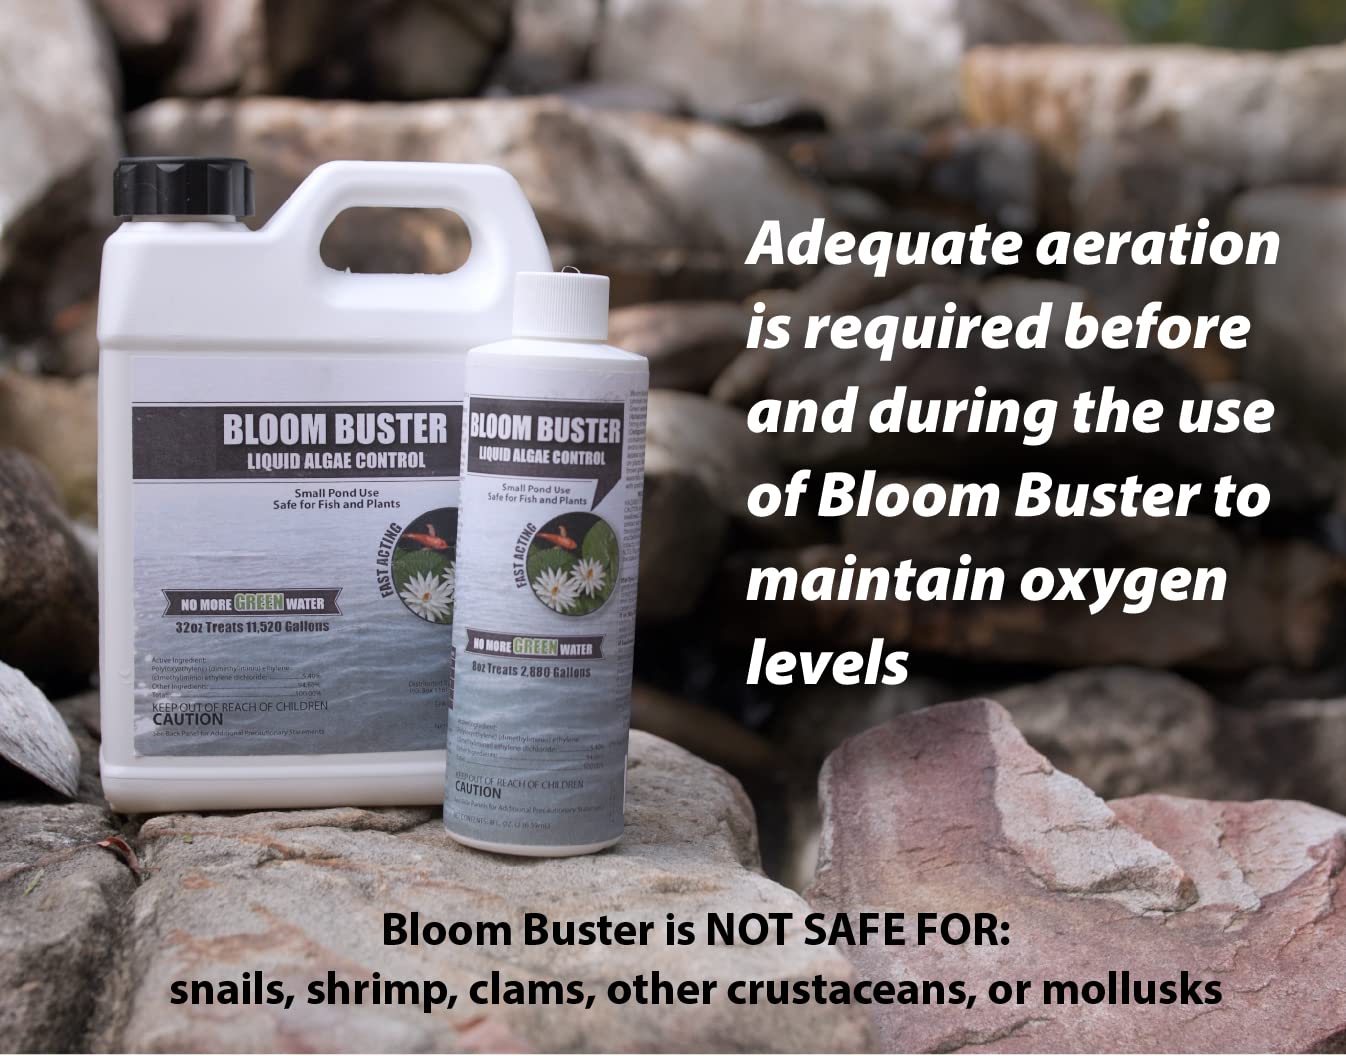 Bloom Buster Algae Control for Fish Ponds & Water Gardens - 8 Ounces - Safe for Koi Fish, Goldfish & Plants - Controls Algae in Ponds & Water Features, EPA Registered